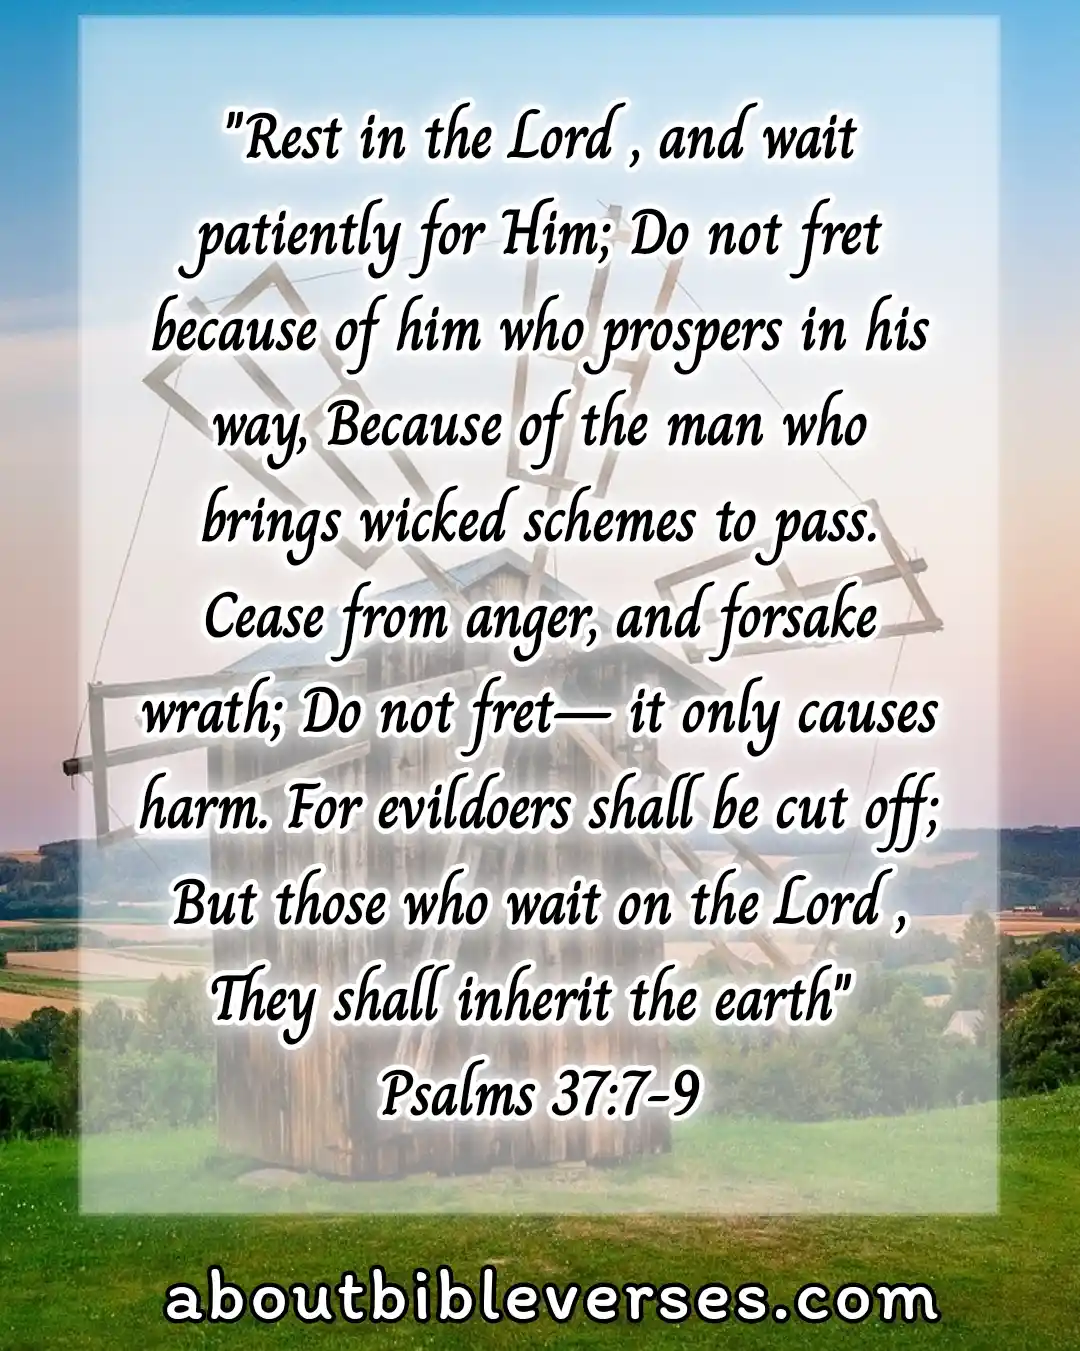 today bible verse (Psalm 37:7-9)